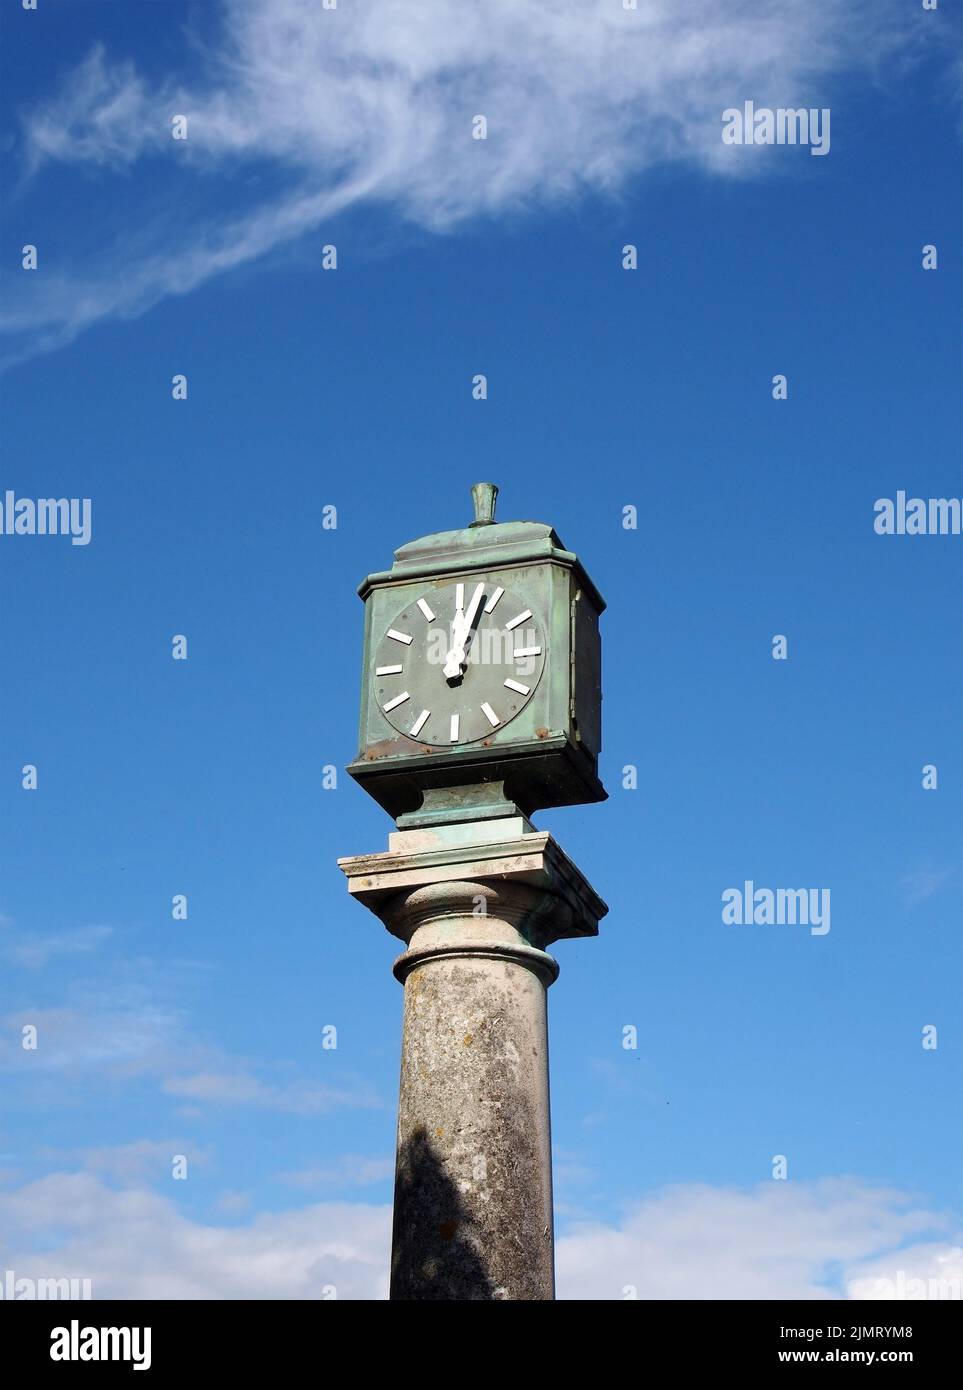 Old green metal outdoor clock on a stone pillar in arnside cumbria against a blue cloudy sky Stock Photo